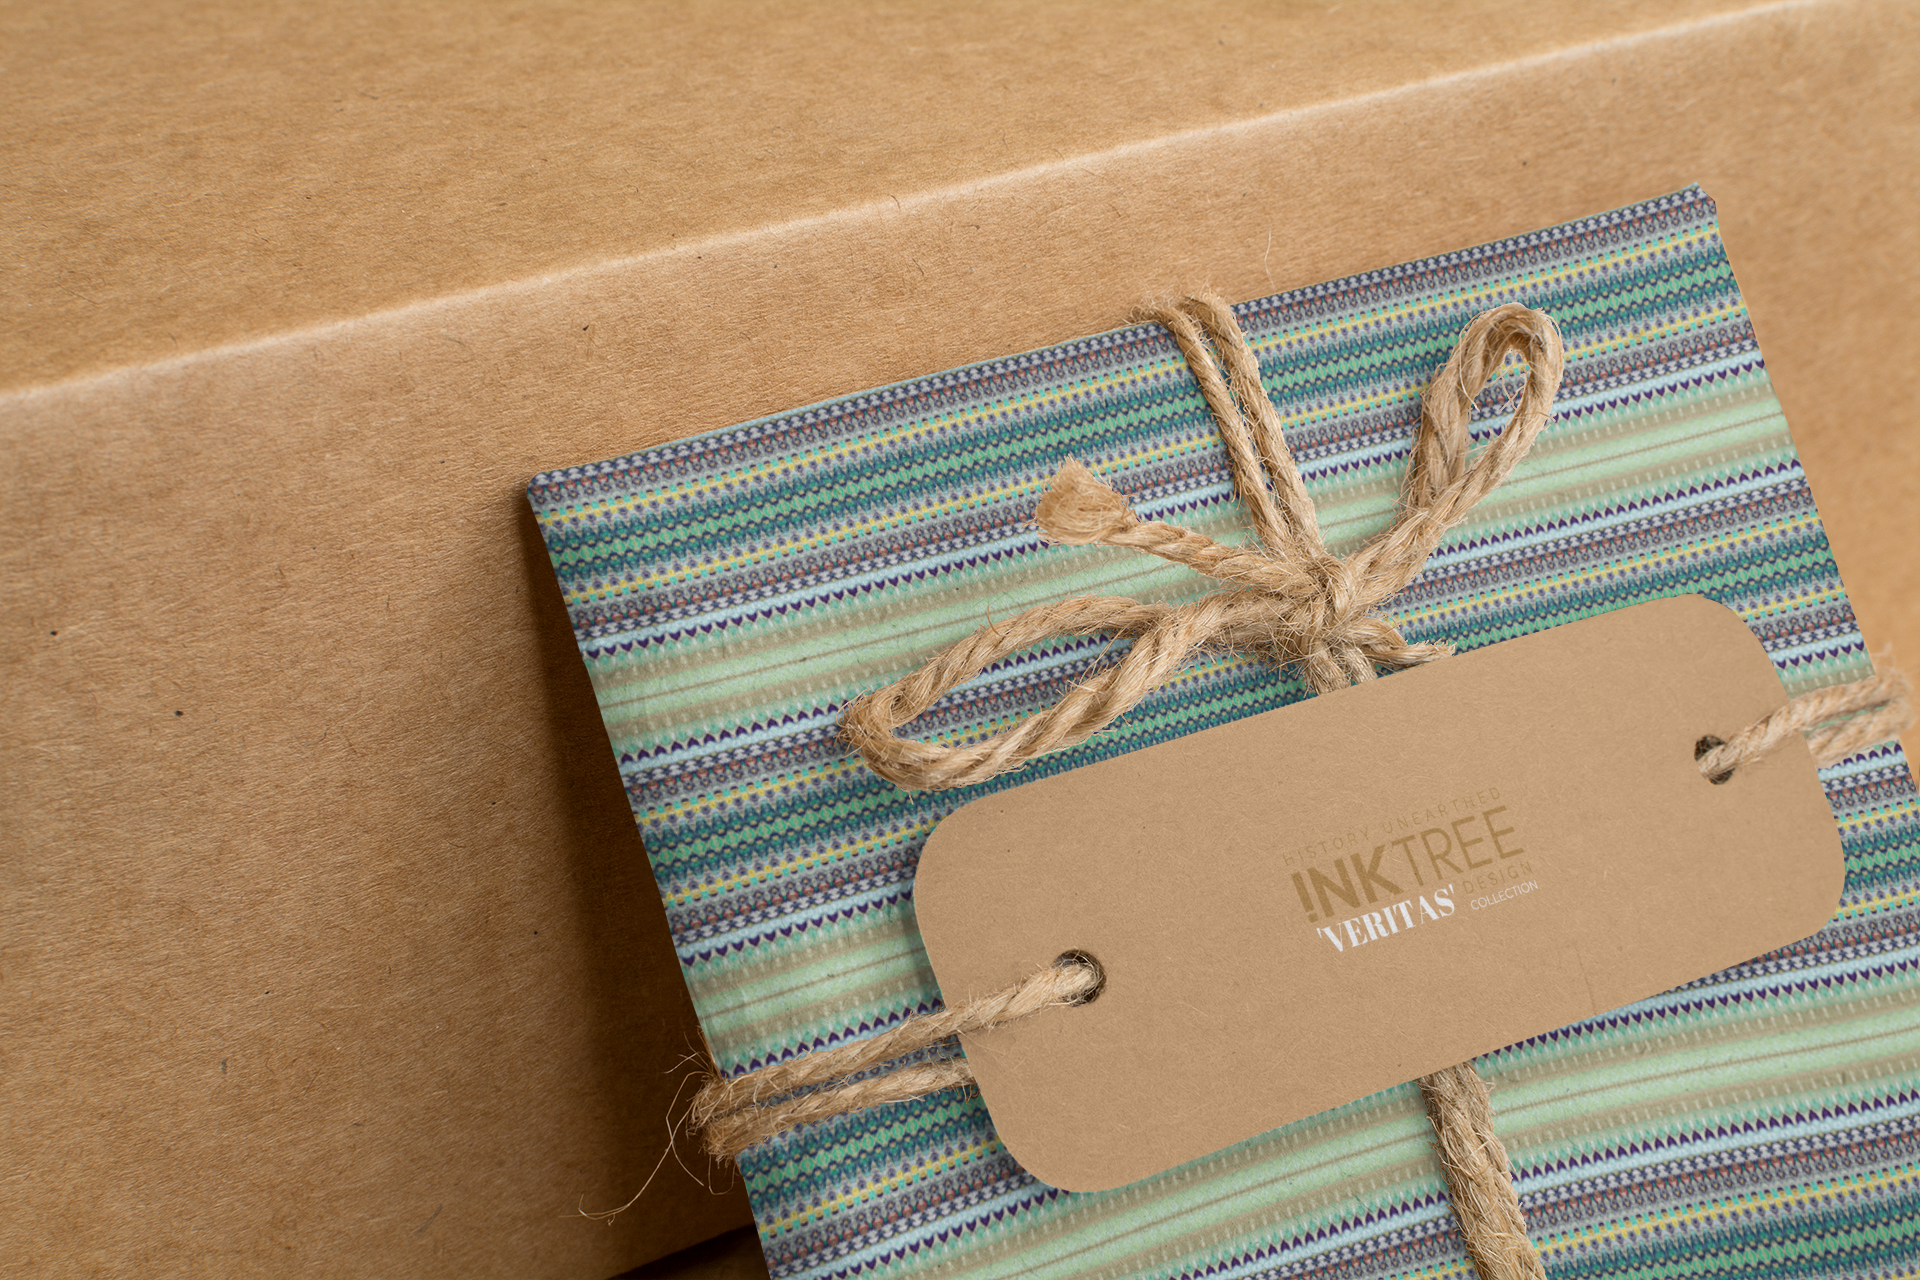 A wrapped present with brown paper in the background.  Tied with brown twine and brown tag, with blue and black and green pattern.